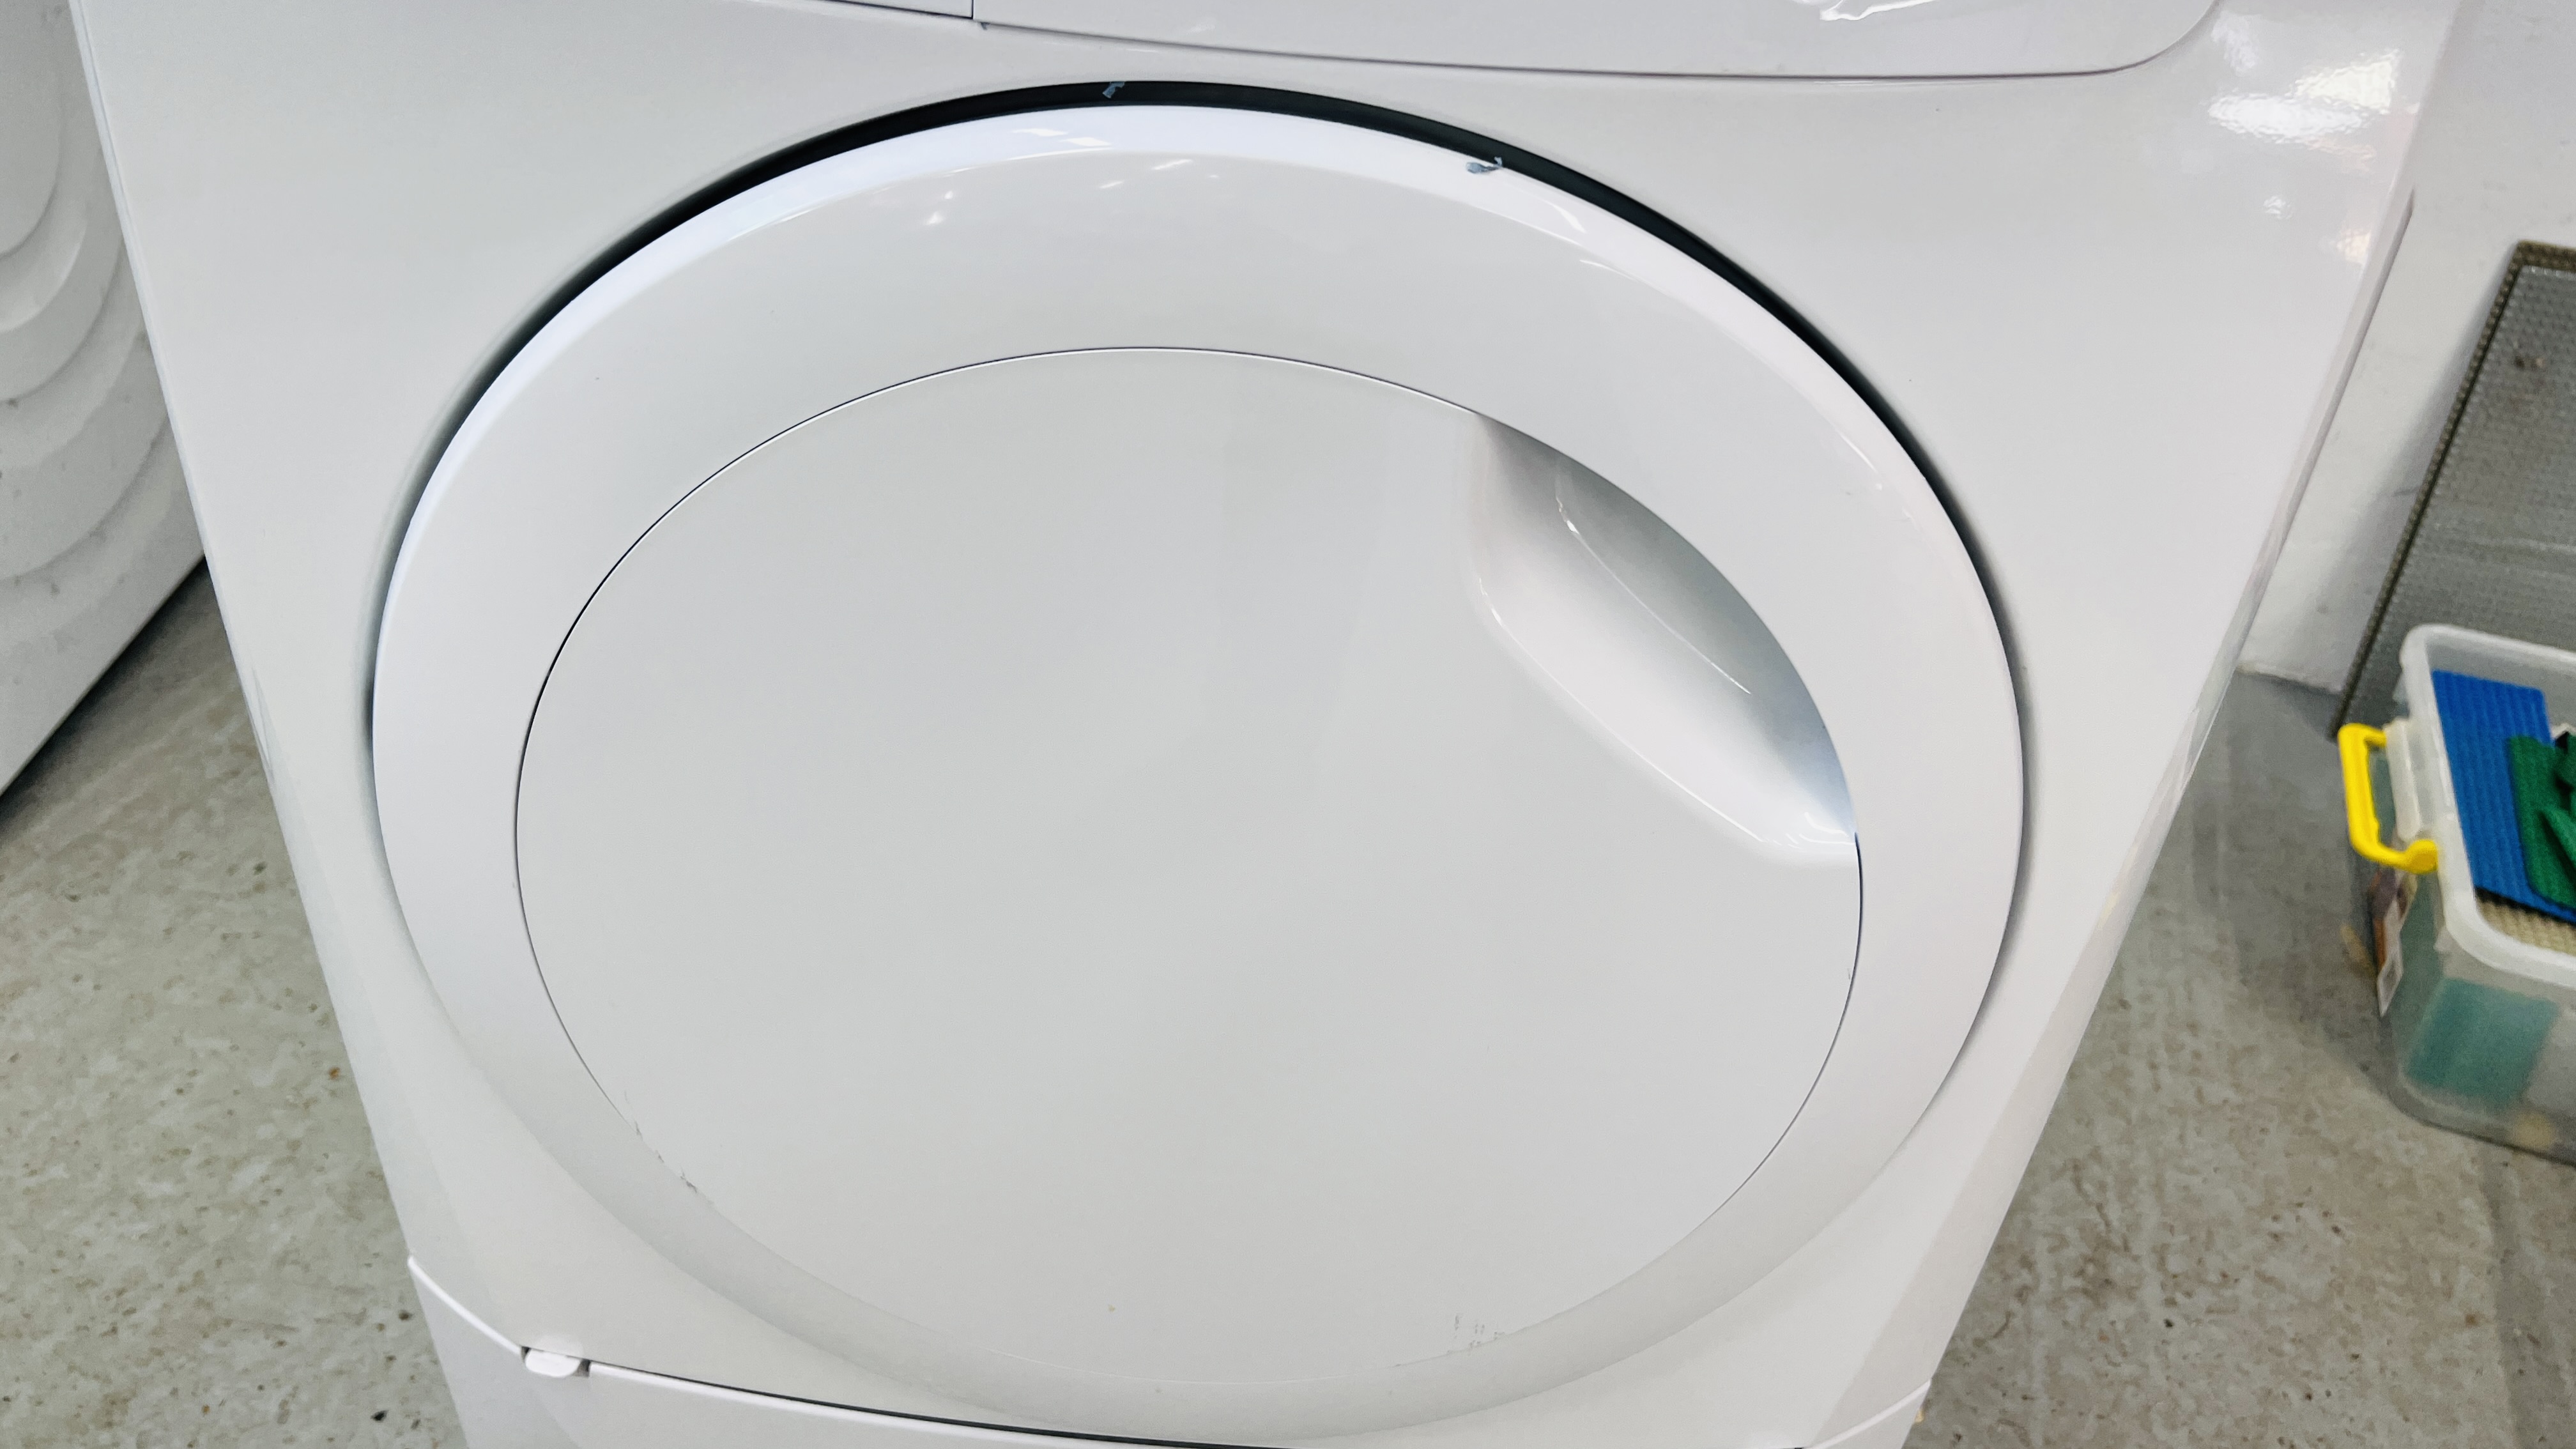 ZANUSSI LINDO 100 TUMBLE DRYER - SOLD AS SEEN. - Image 4 of 9